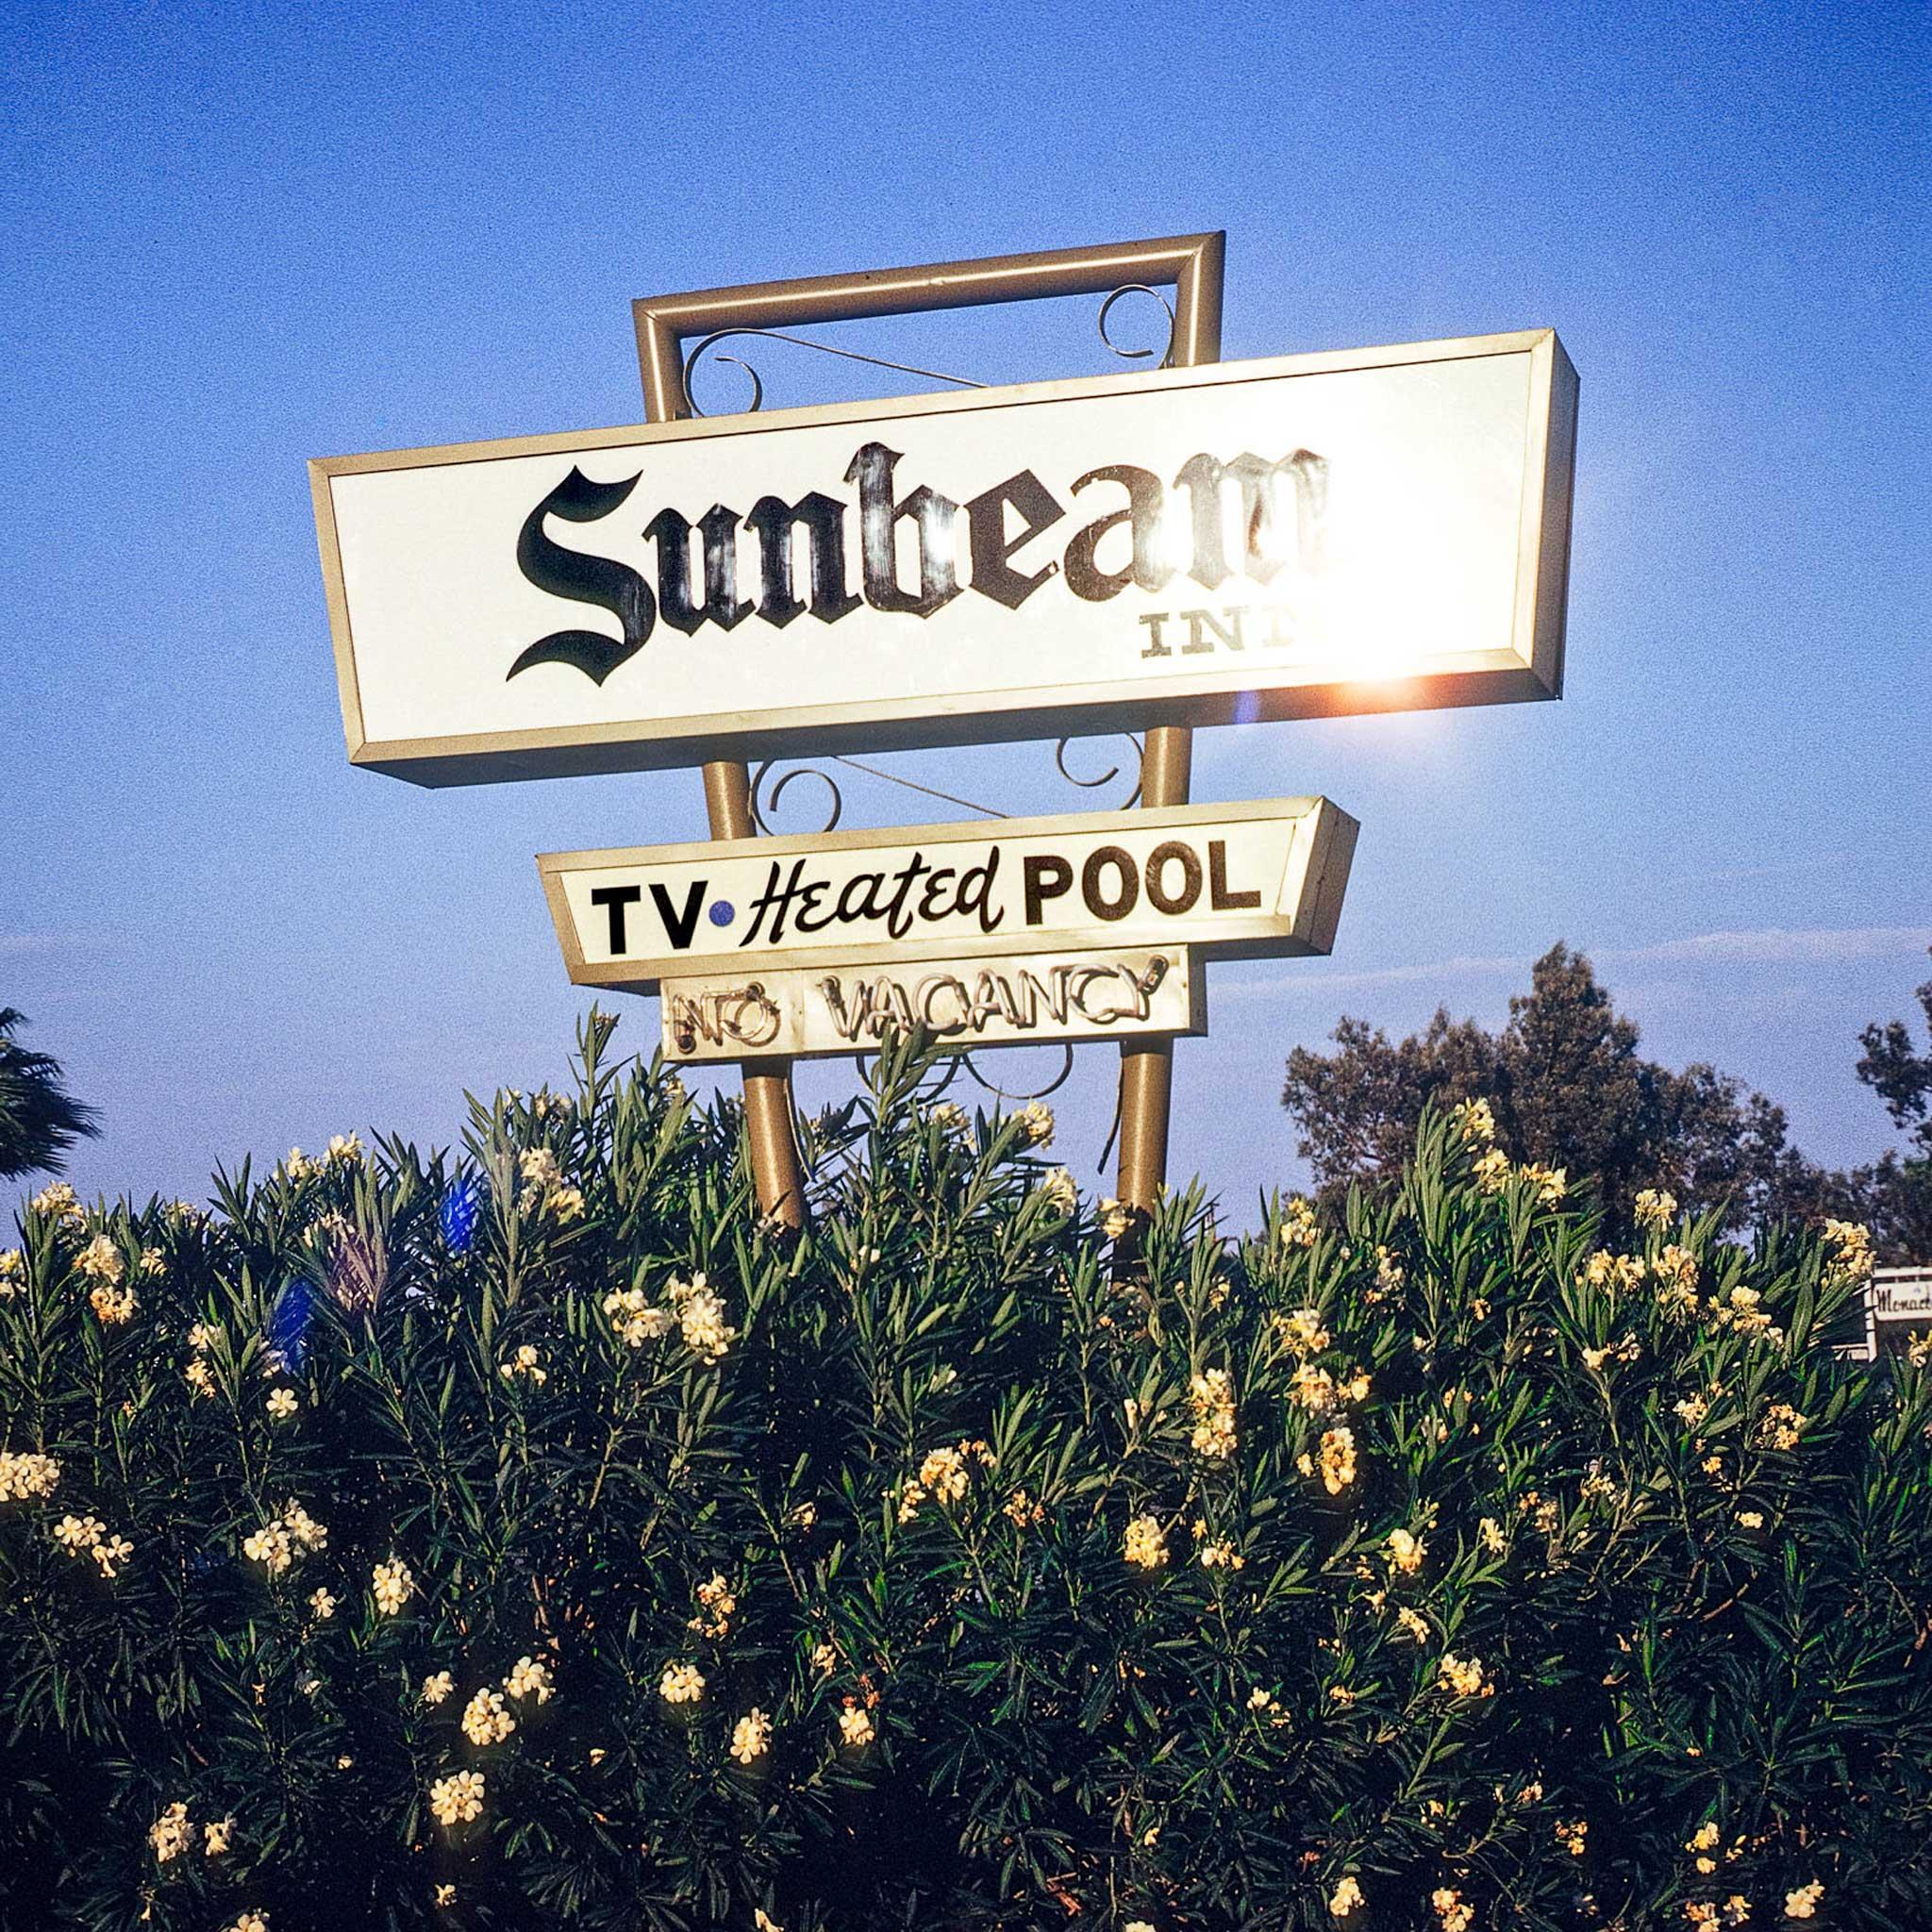 A sign that says "sunbeam" above a flower bush